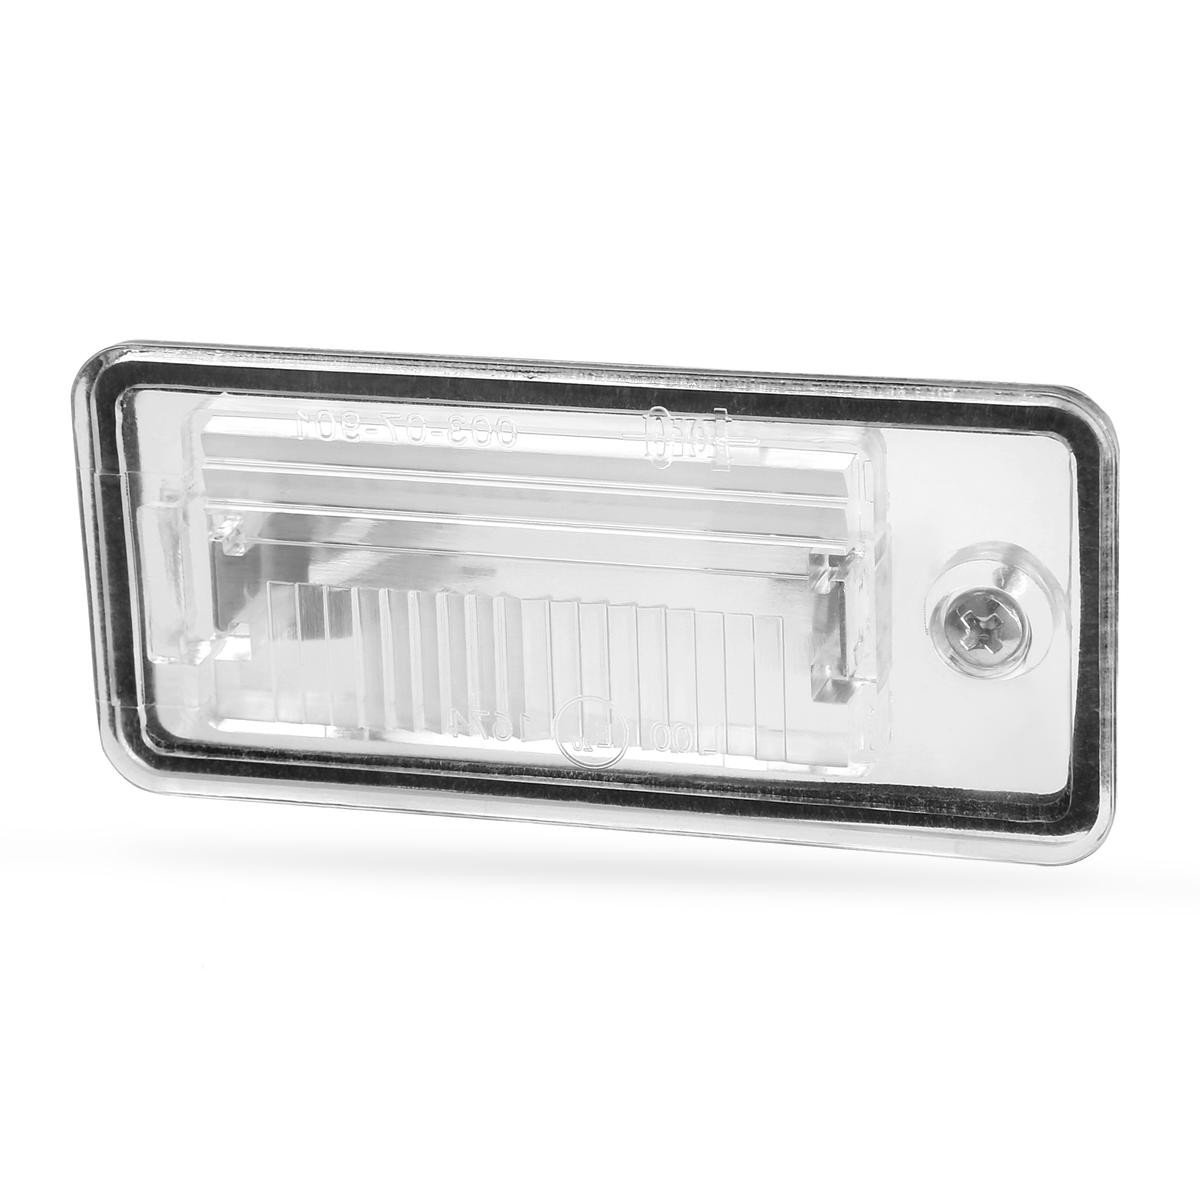 Audi Licence Plate Light ABAKUS 003-07-904 at a good price